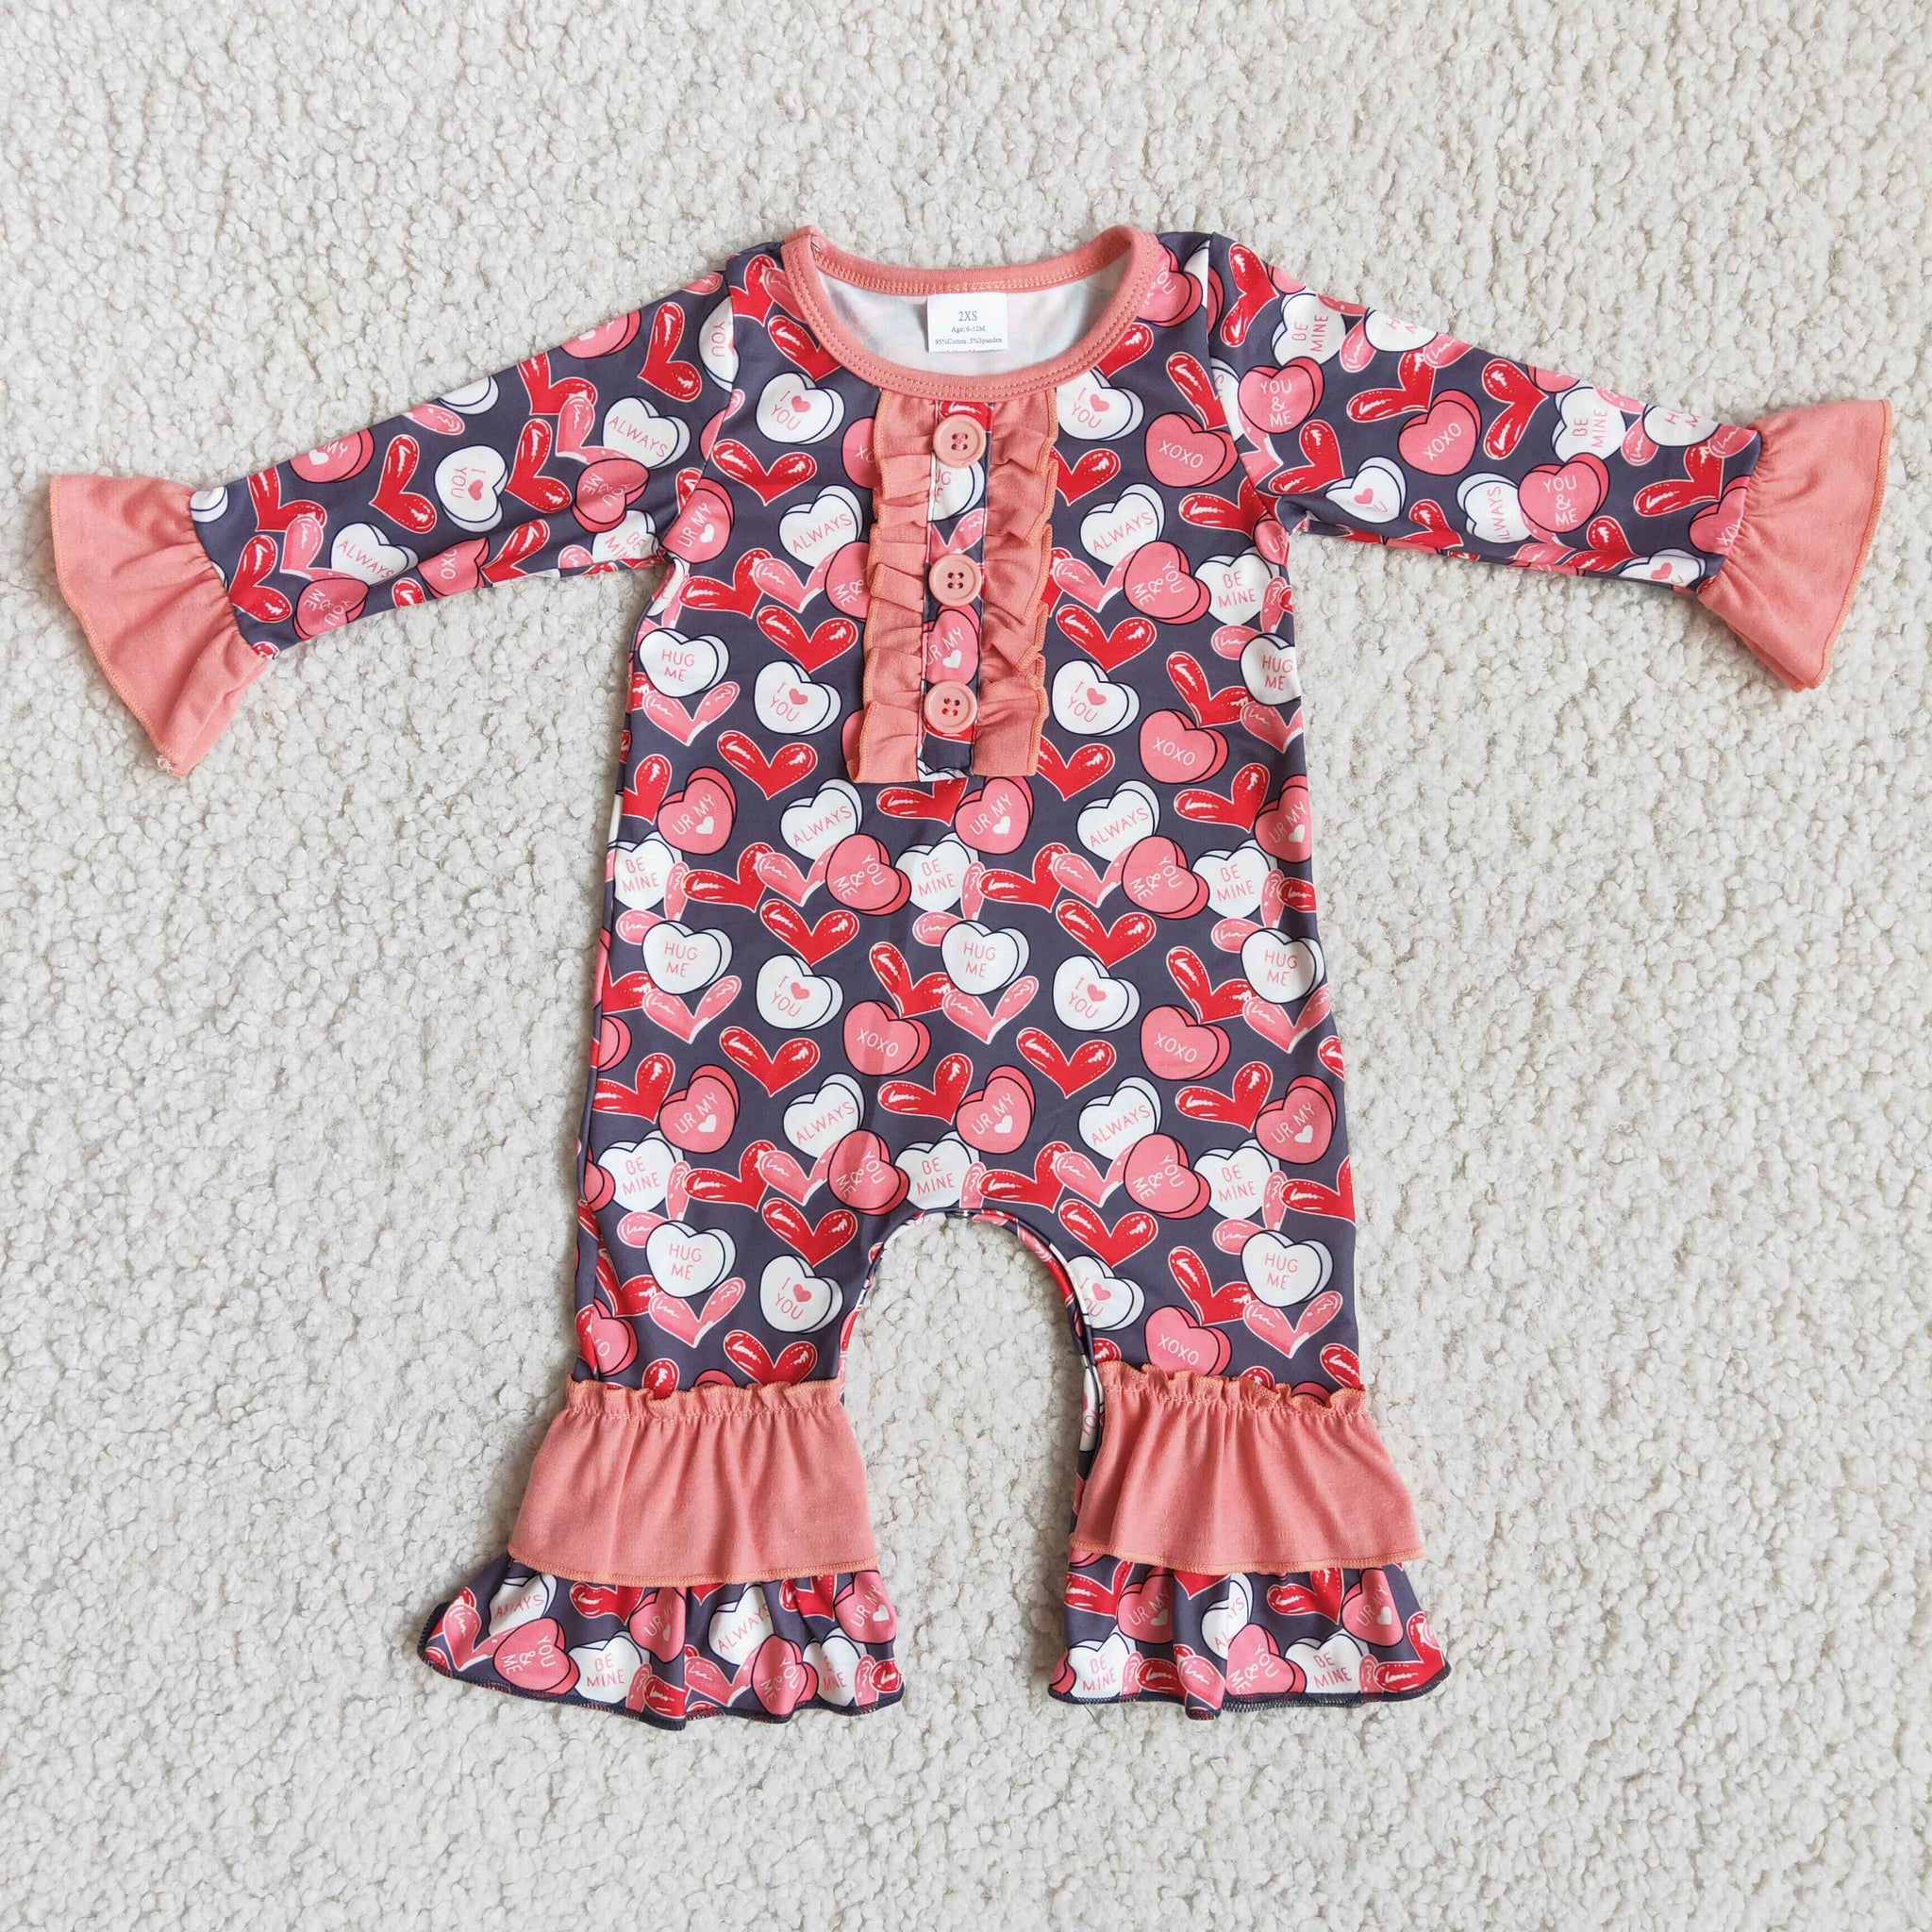 6 A7-10 baby girl clothes heart valentines day romper